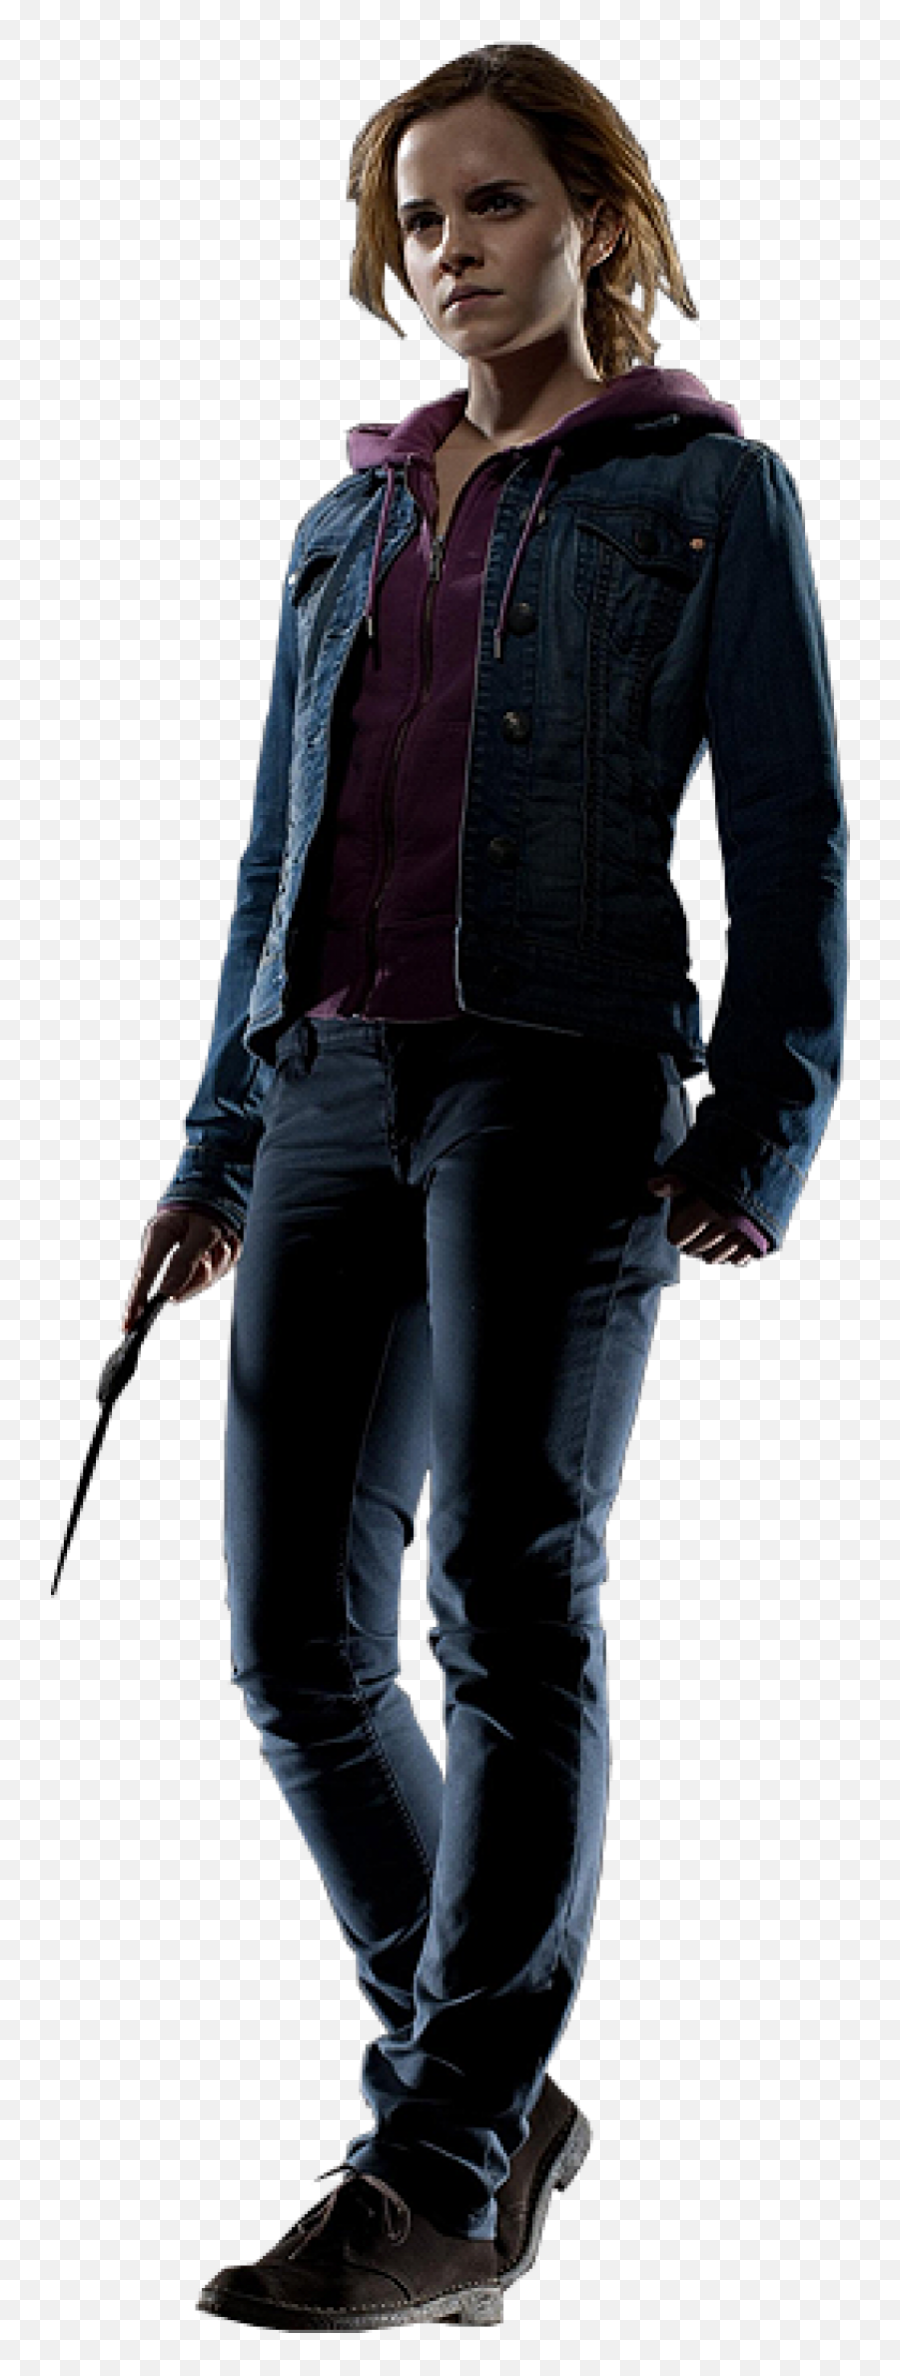 Hermione Harry Potter Png Image - Potter And The Deathly Hallows,Harry Potter Transparent